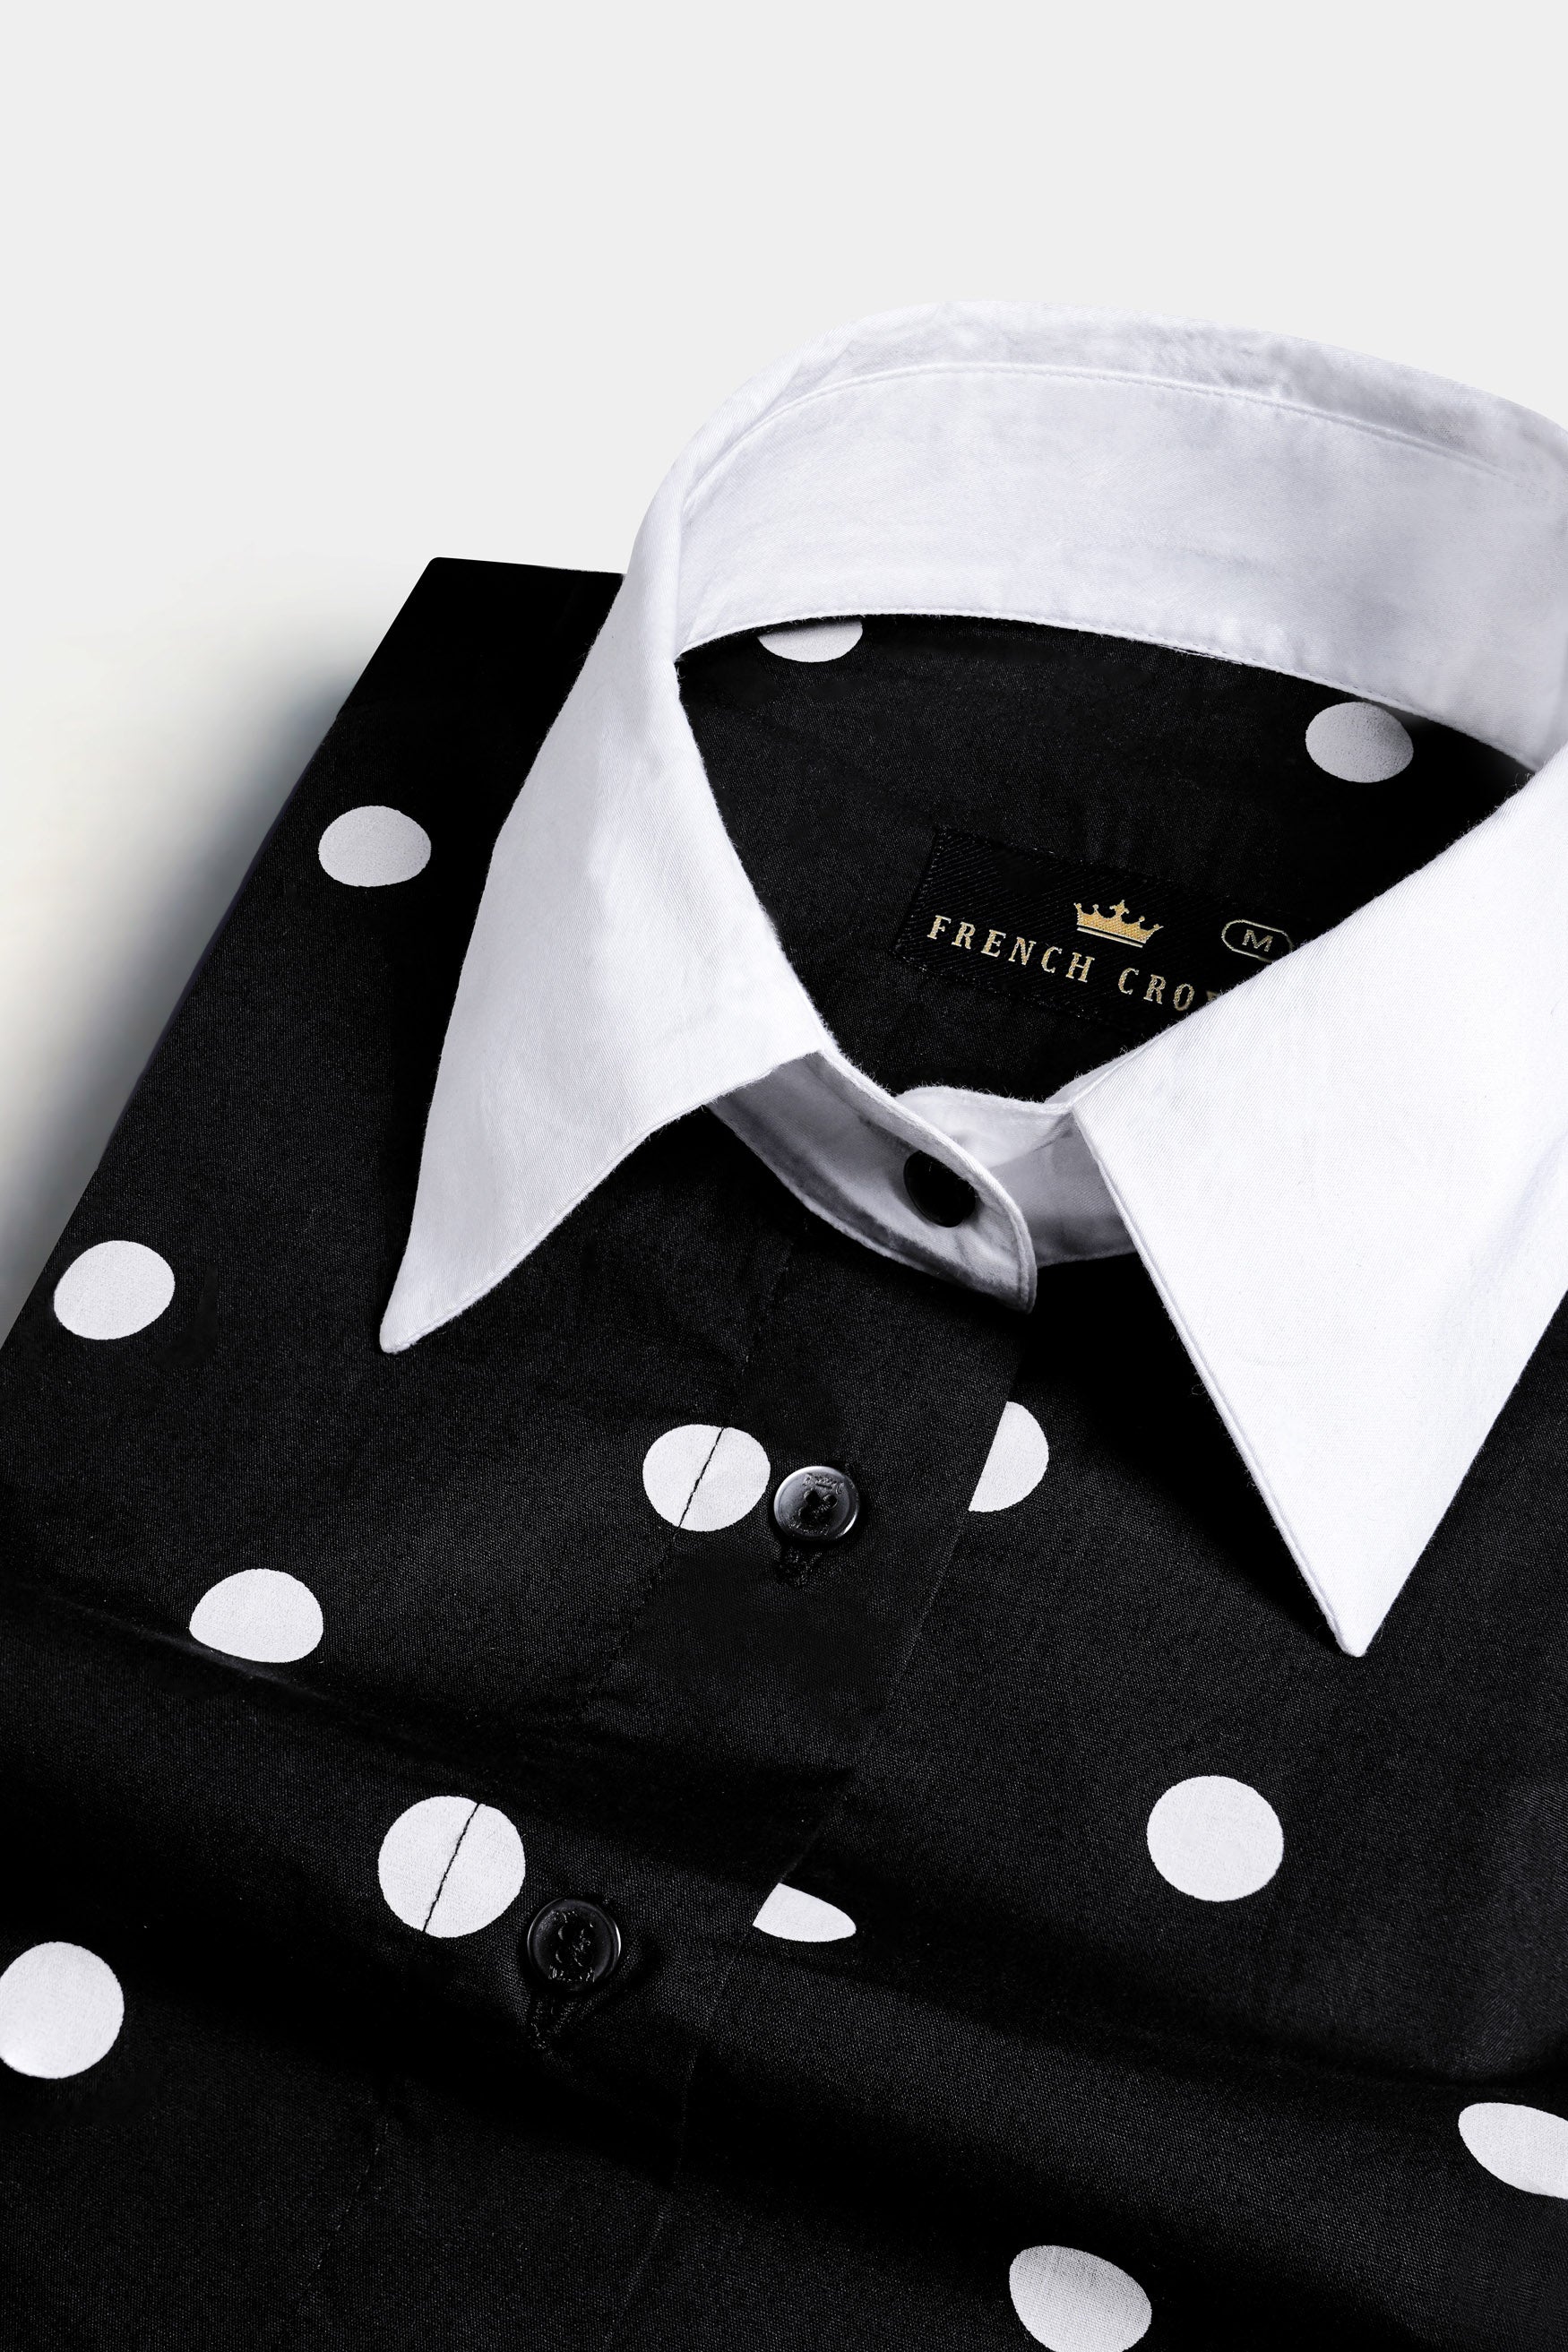 Jade Black and White Polka Dotted Premium Cotton Shirt With White Cuffs and Collar